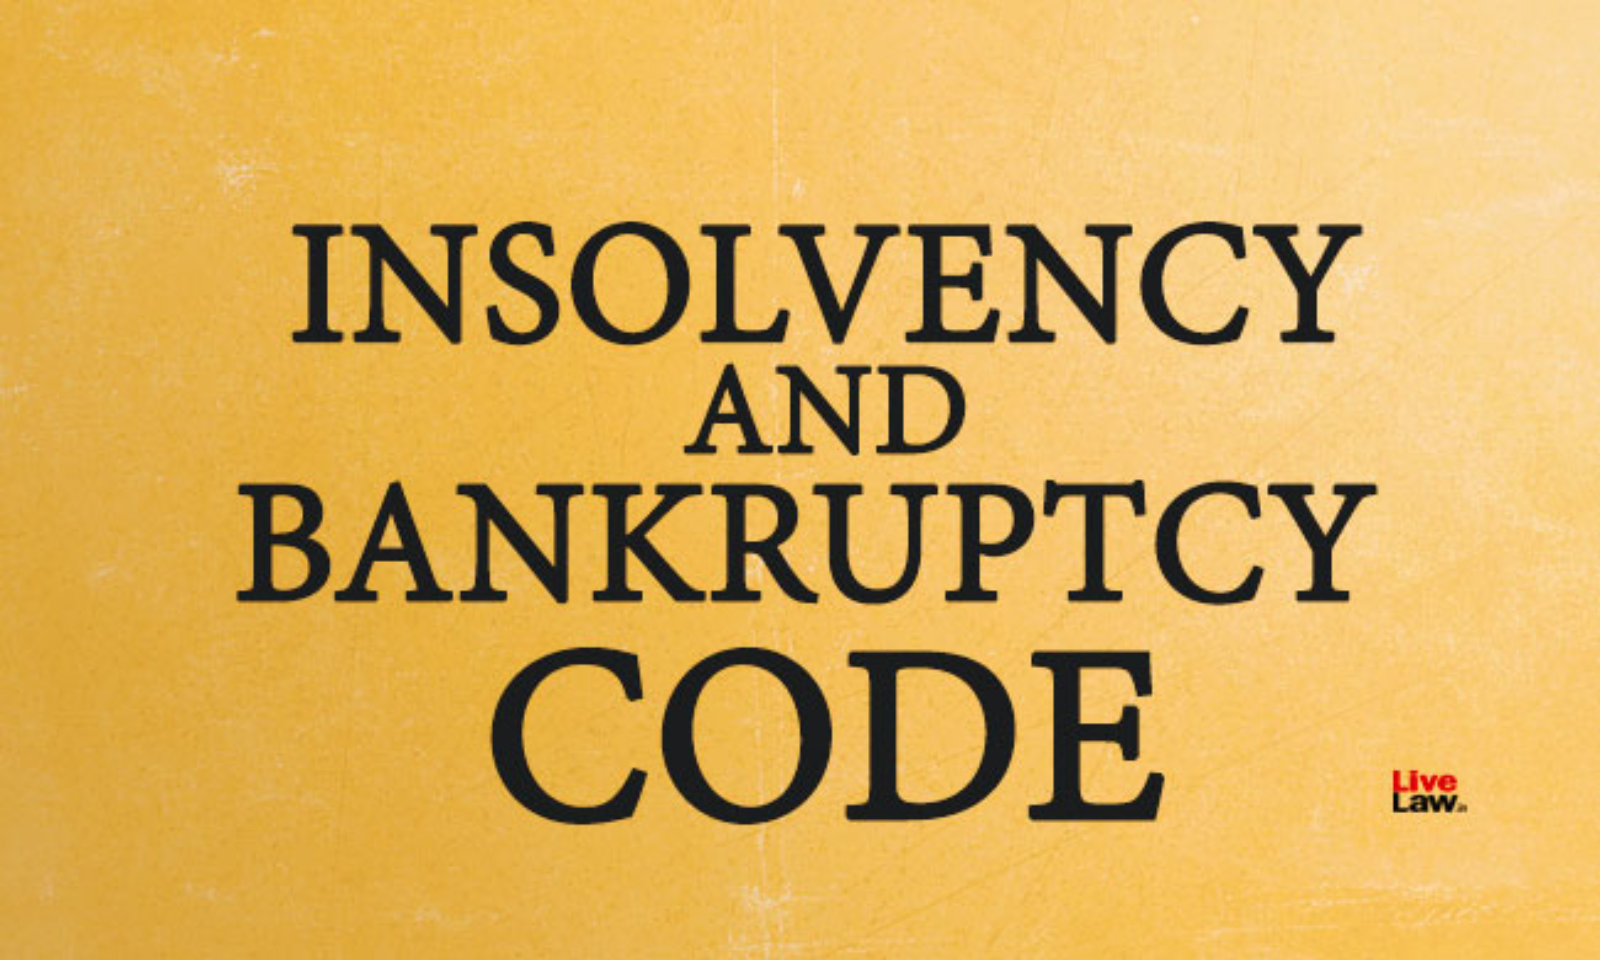 Tracing The Formation Of The Insolvency And Bankruptcy Code 2016 And What Makes It A Game-Changer